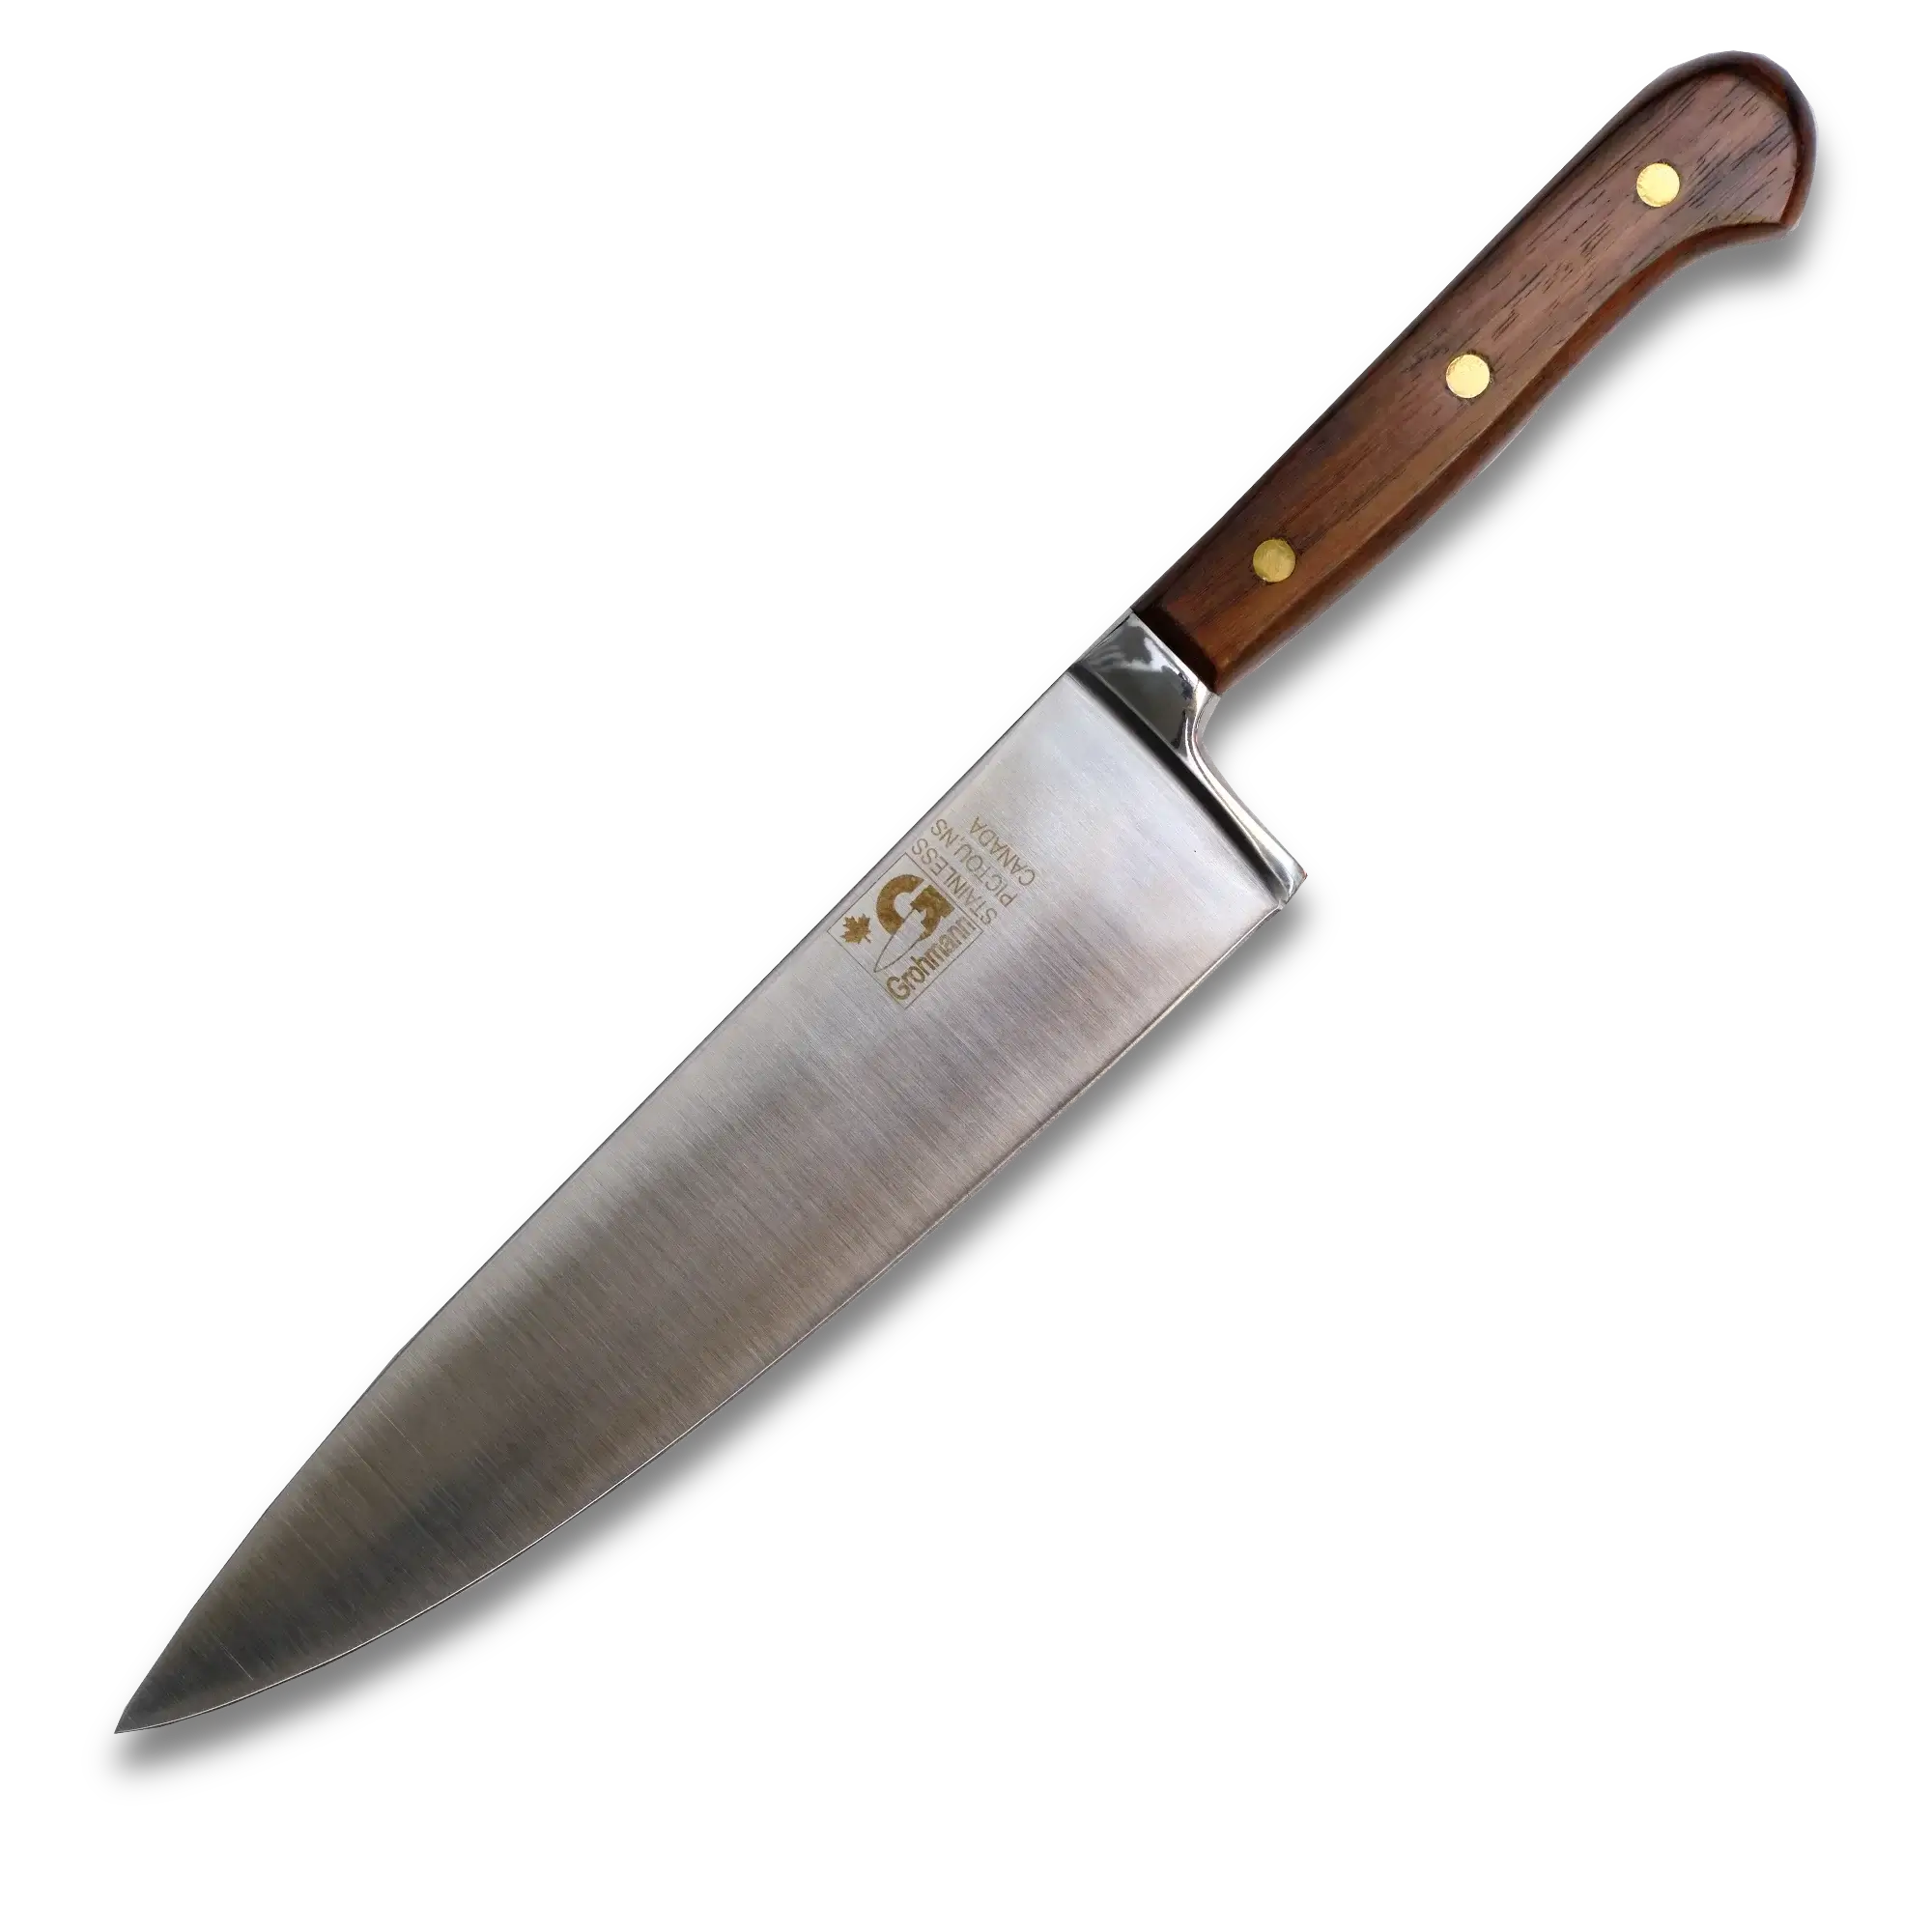 Grohmann Forged Heavy - Chef Knife 8" Forged Steel - #209FG-8